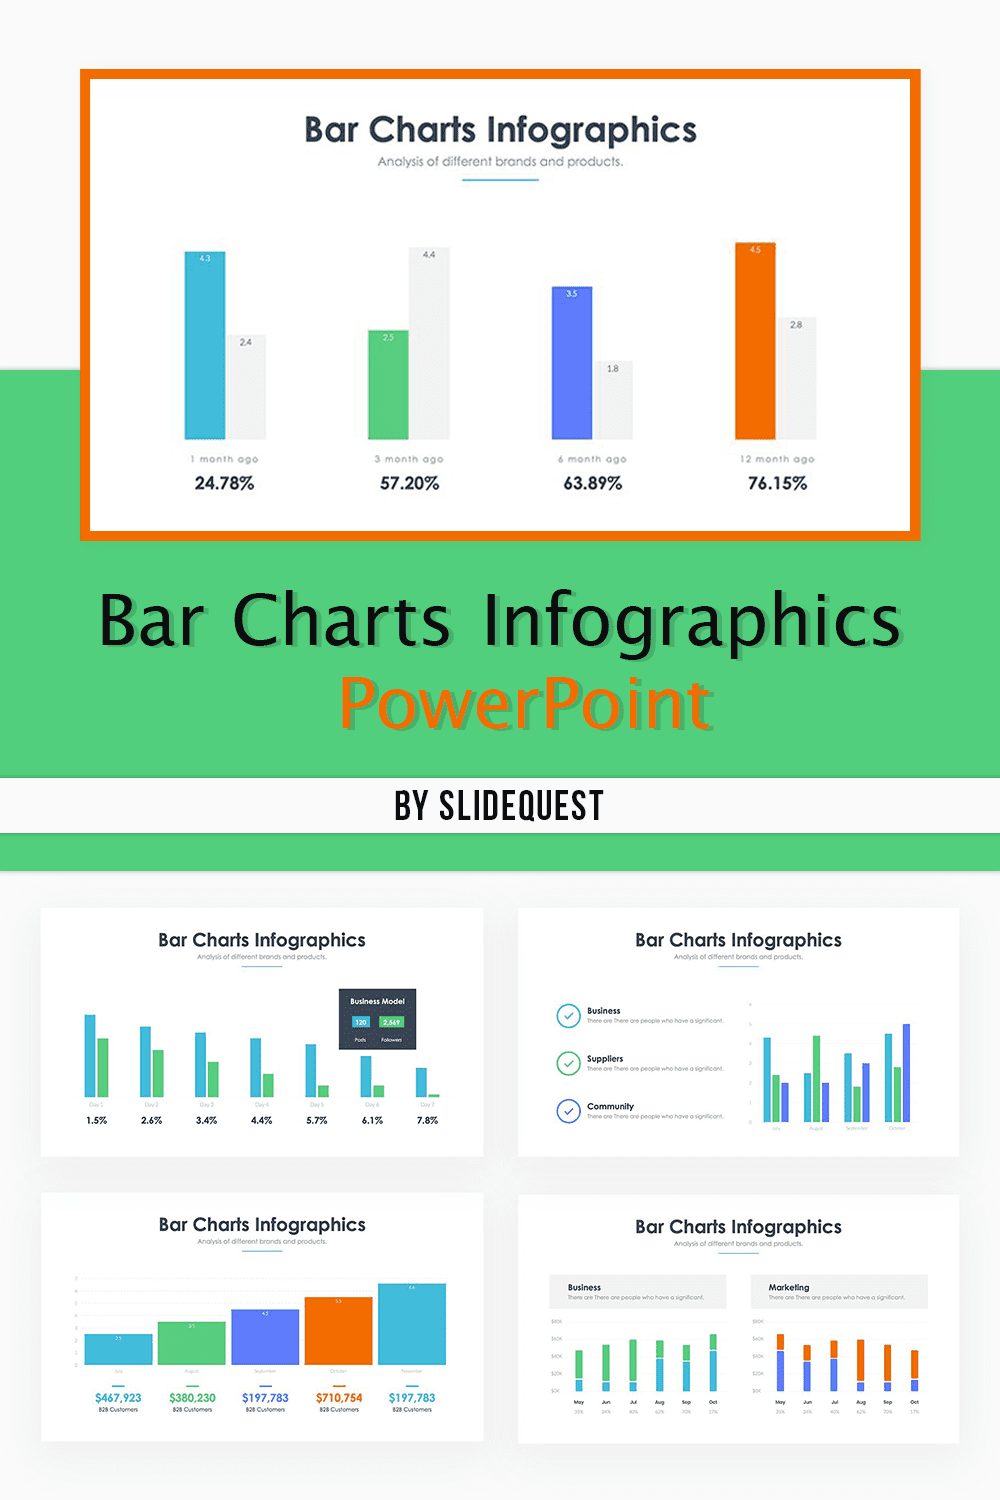 Bar Charts Infographics - PowerPoint pinterest image.